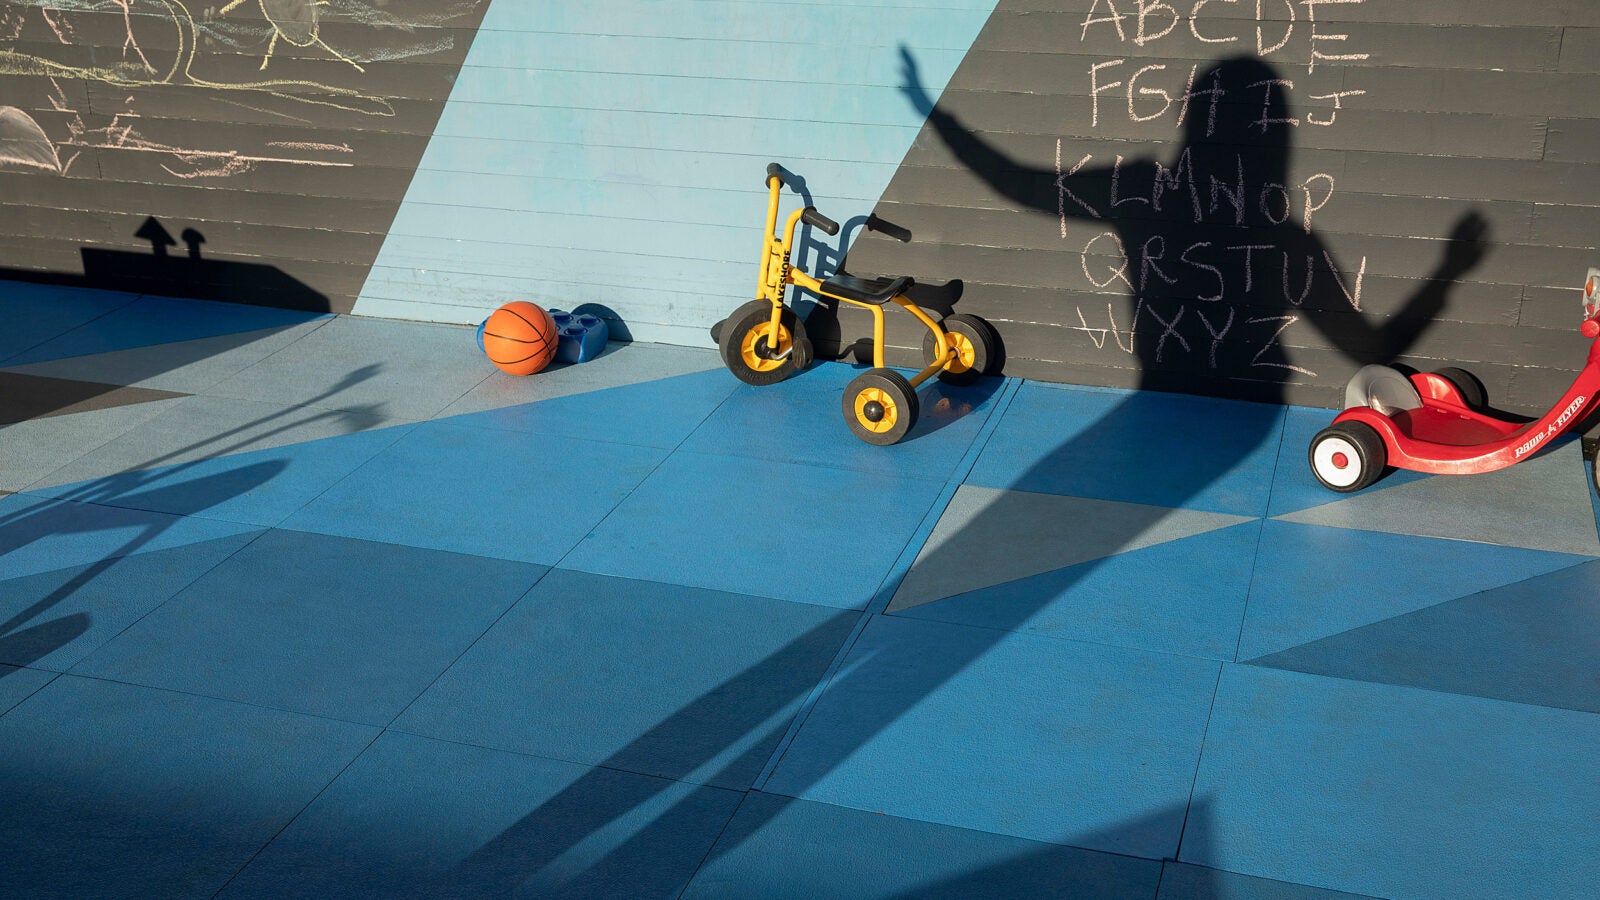 Shadow showing across playground.